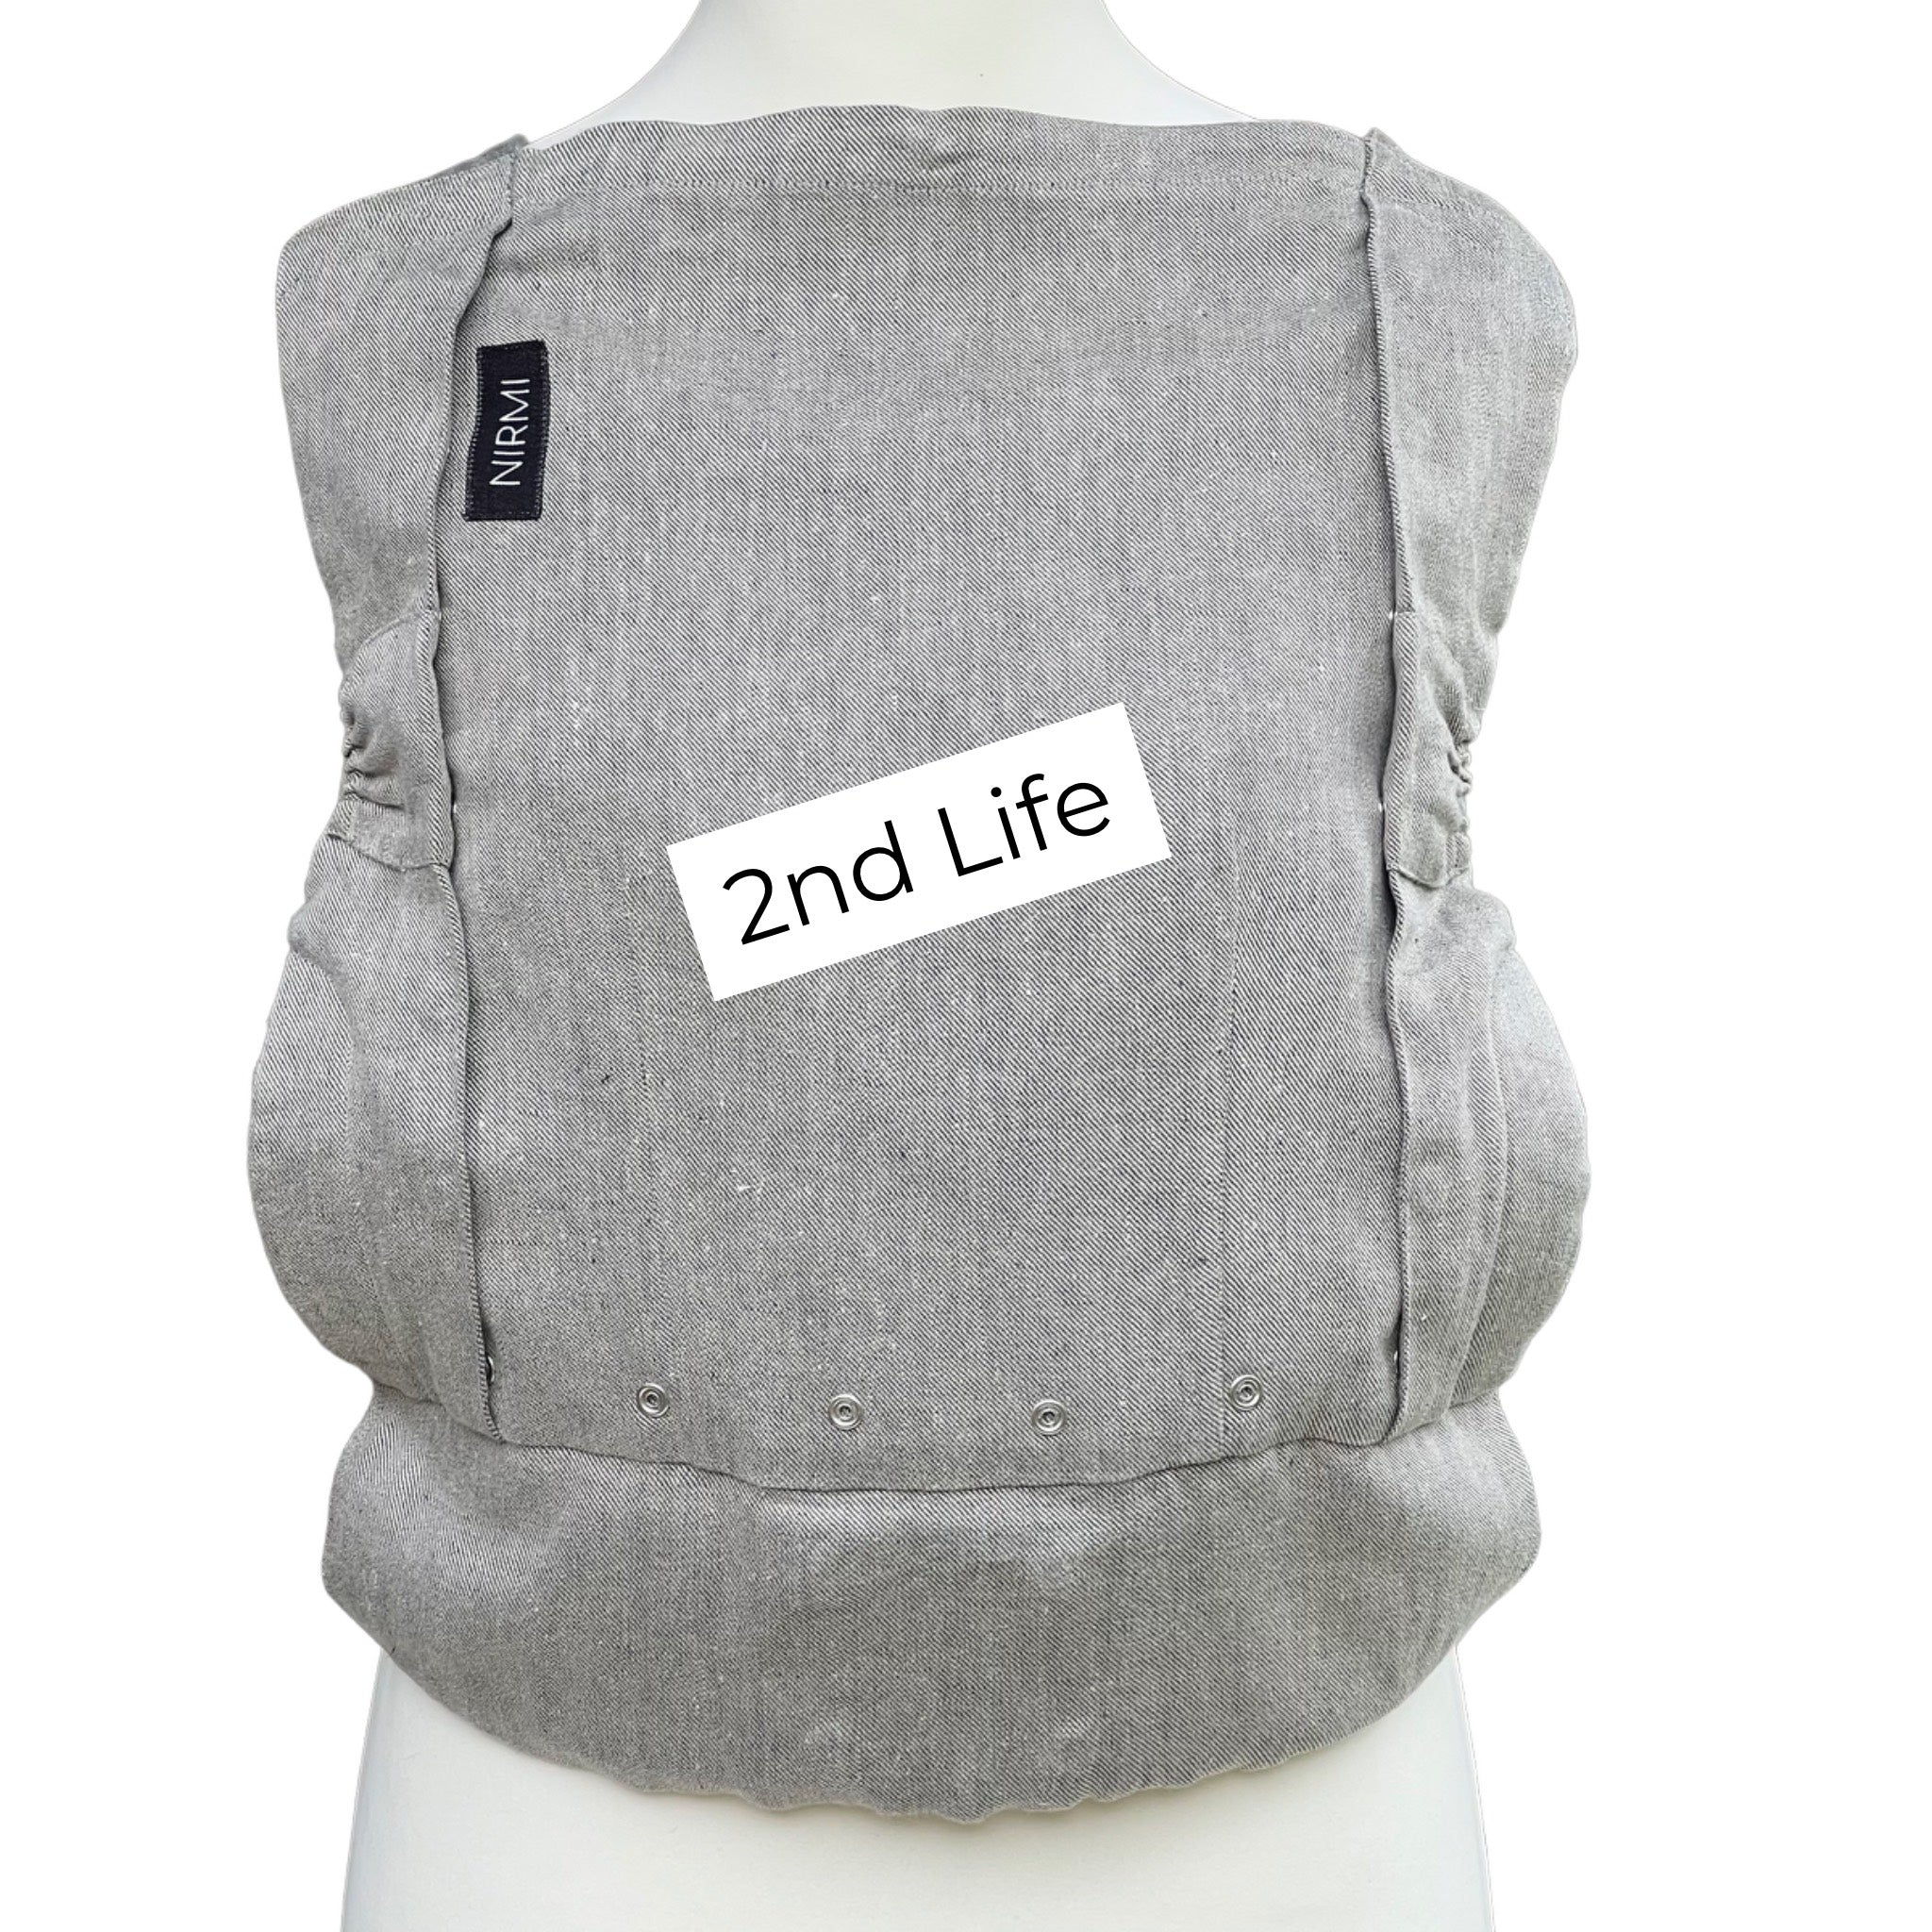 NIRMI baby carrier Pure | Second Life